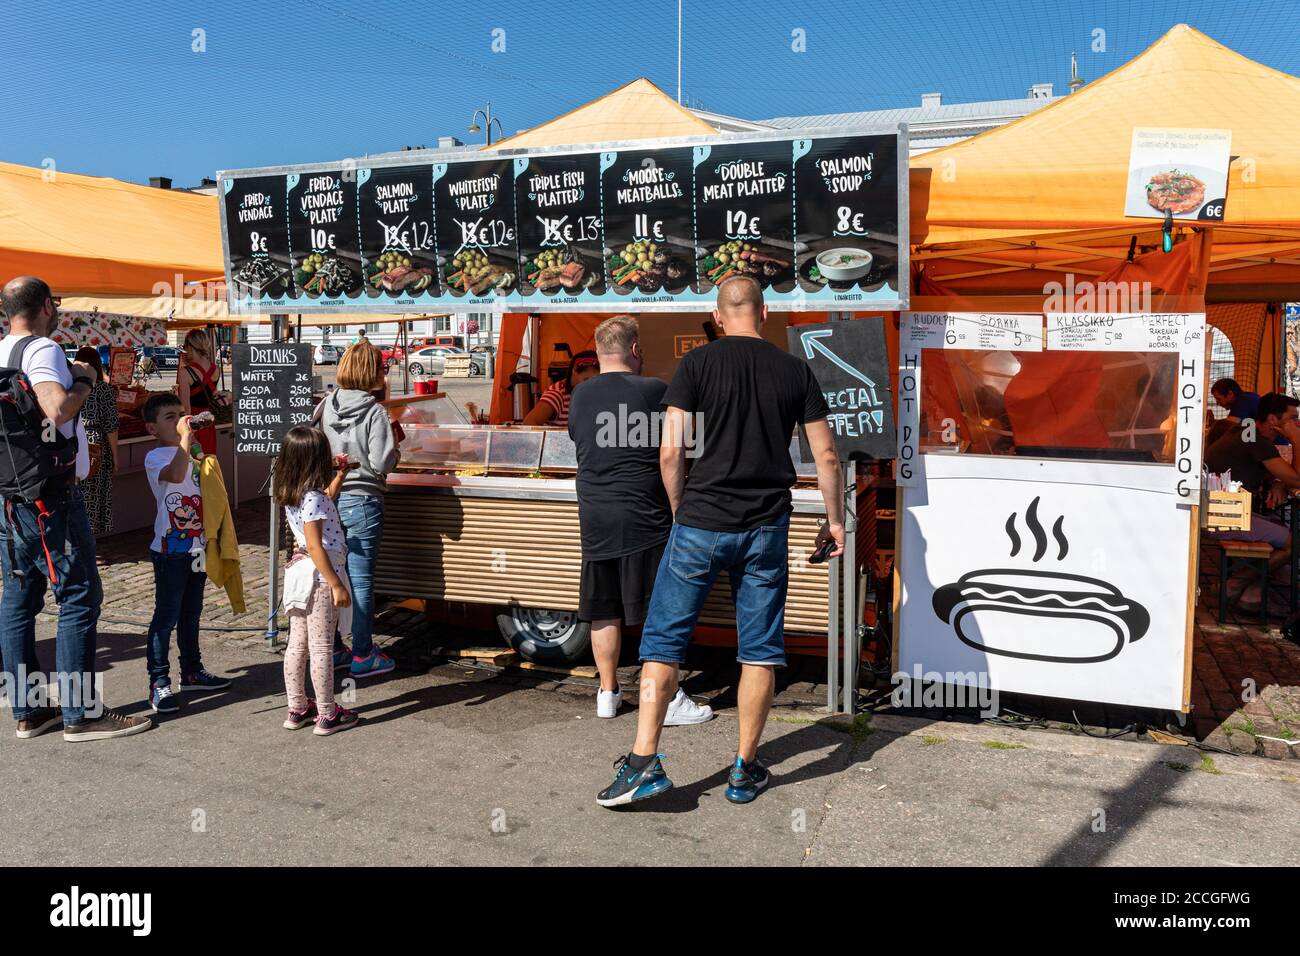 People queuing at seafood vendor's stall for fish dishes in Helsinki Market Square, Finland Stock Photo